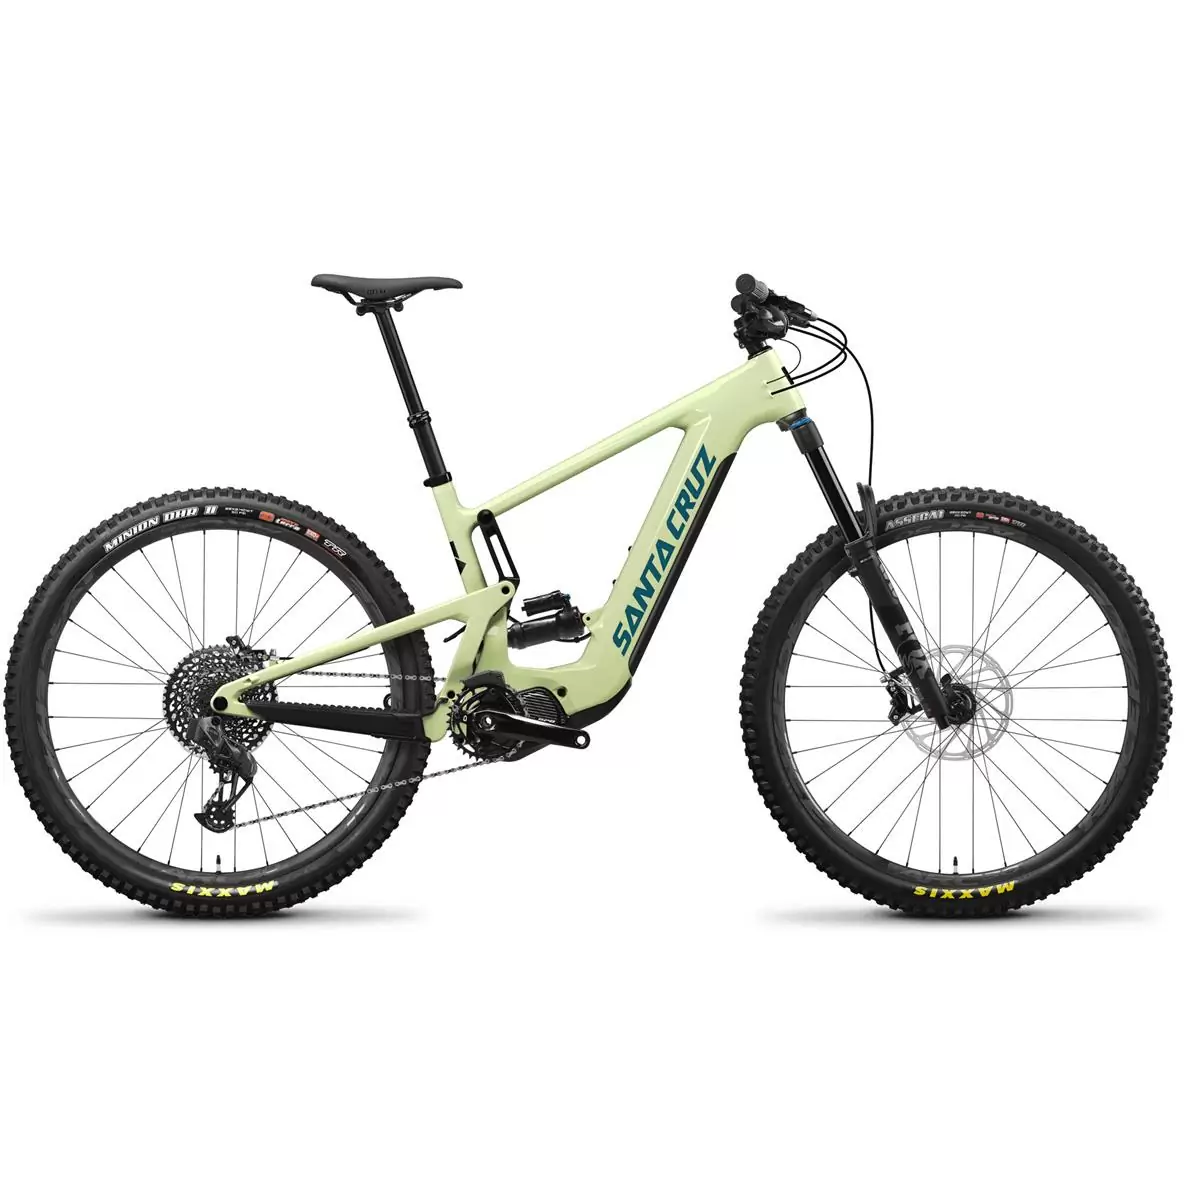 Heckler 9 C GX AXS 29'' 160mm 12s 720Wh Shimano EP8 Verde Aguacate 2023 Talla M - image